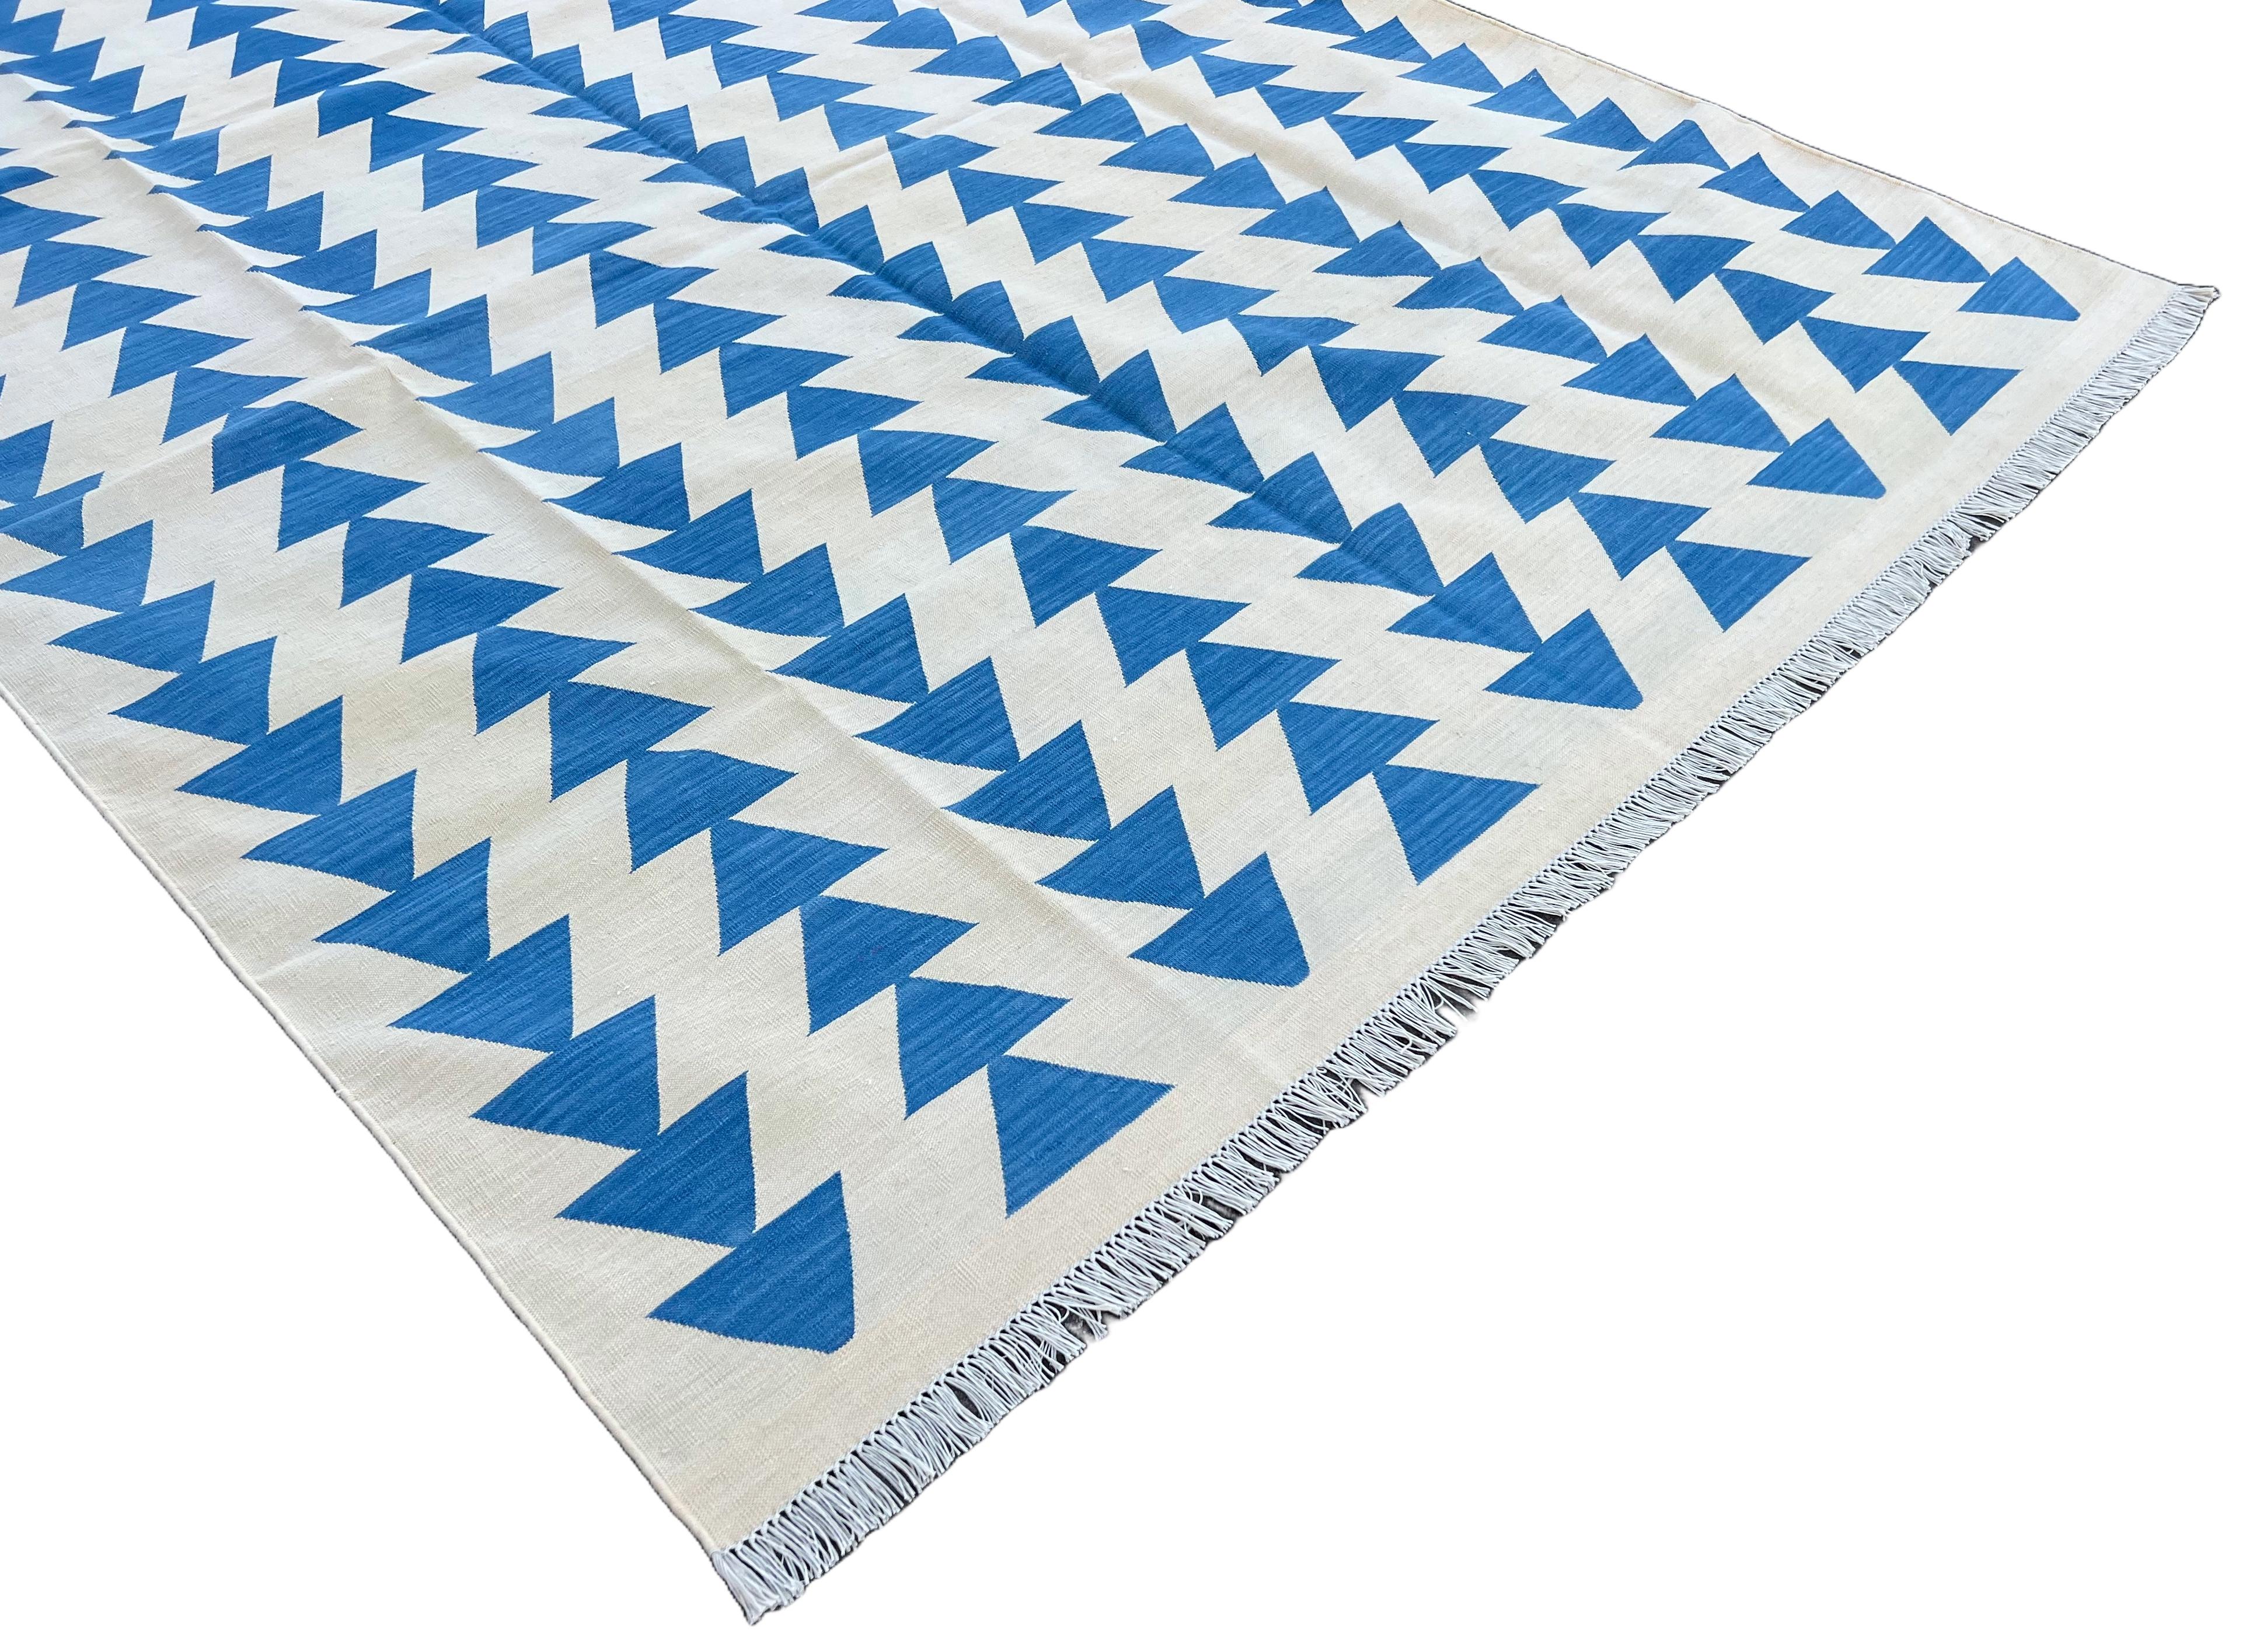 Hand-Woven Handmade Cotton Area Flat Weave Rug, Cream & Blue Pyramid Checked Indian Dhurrie For Sale